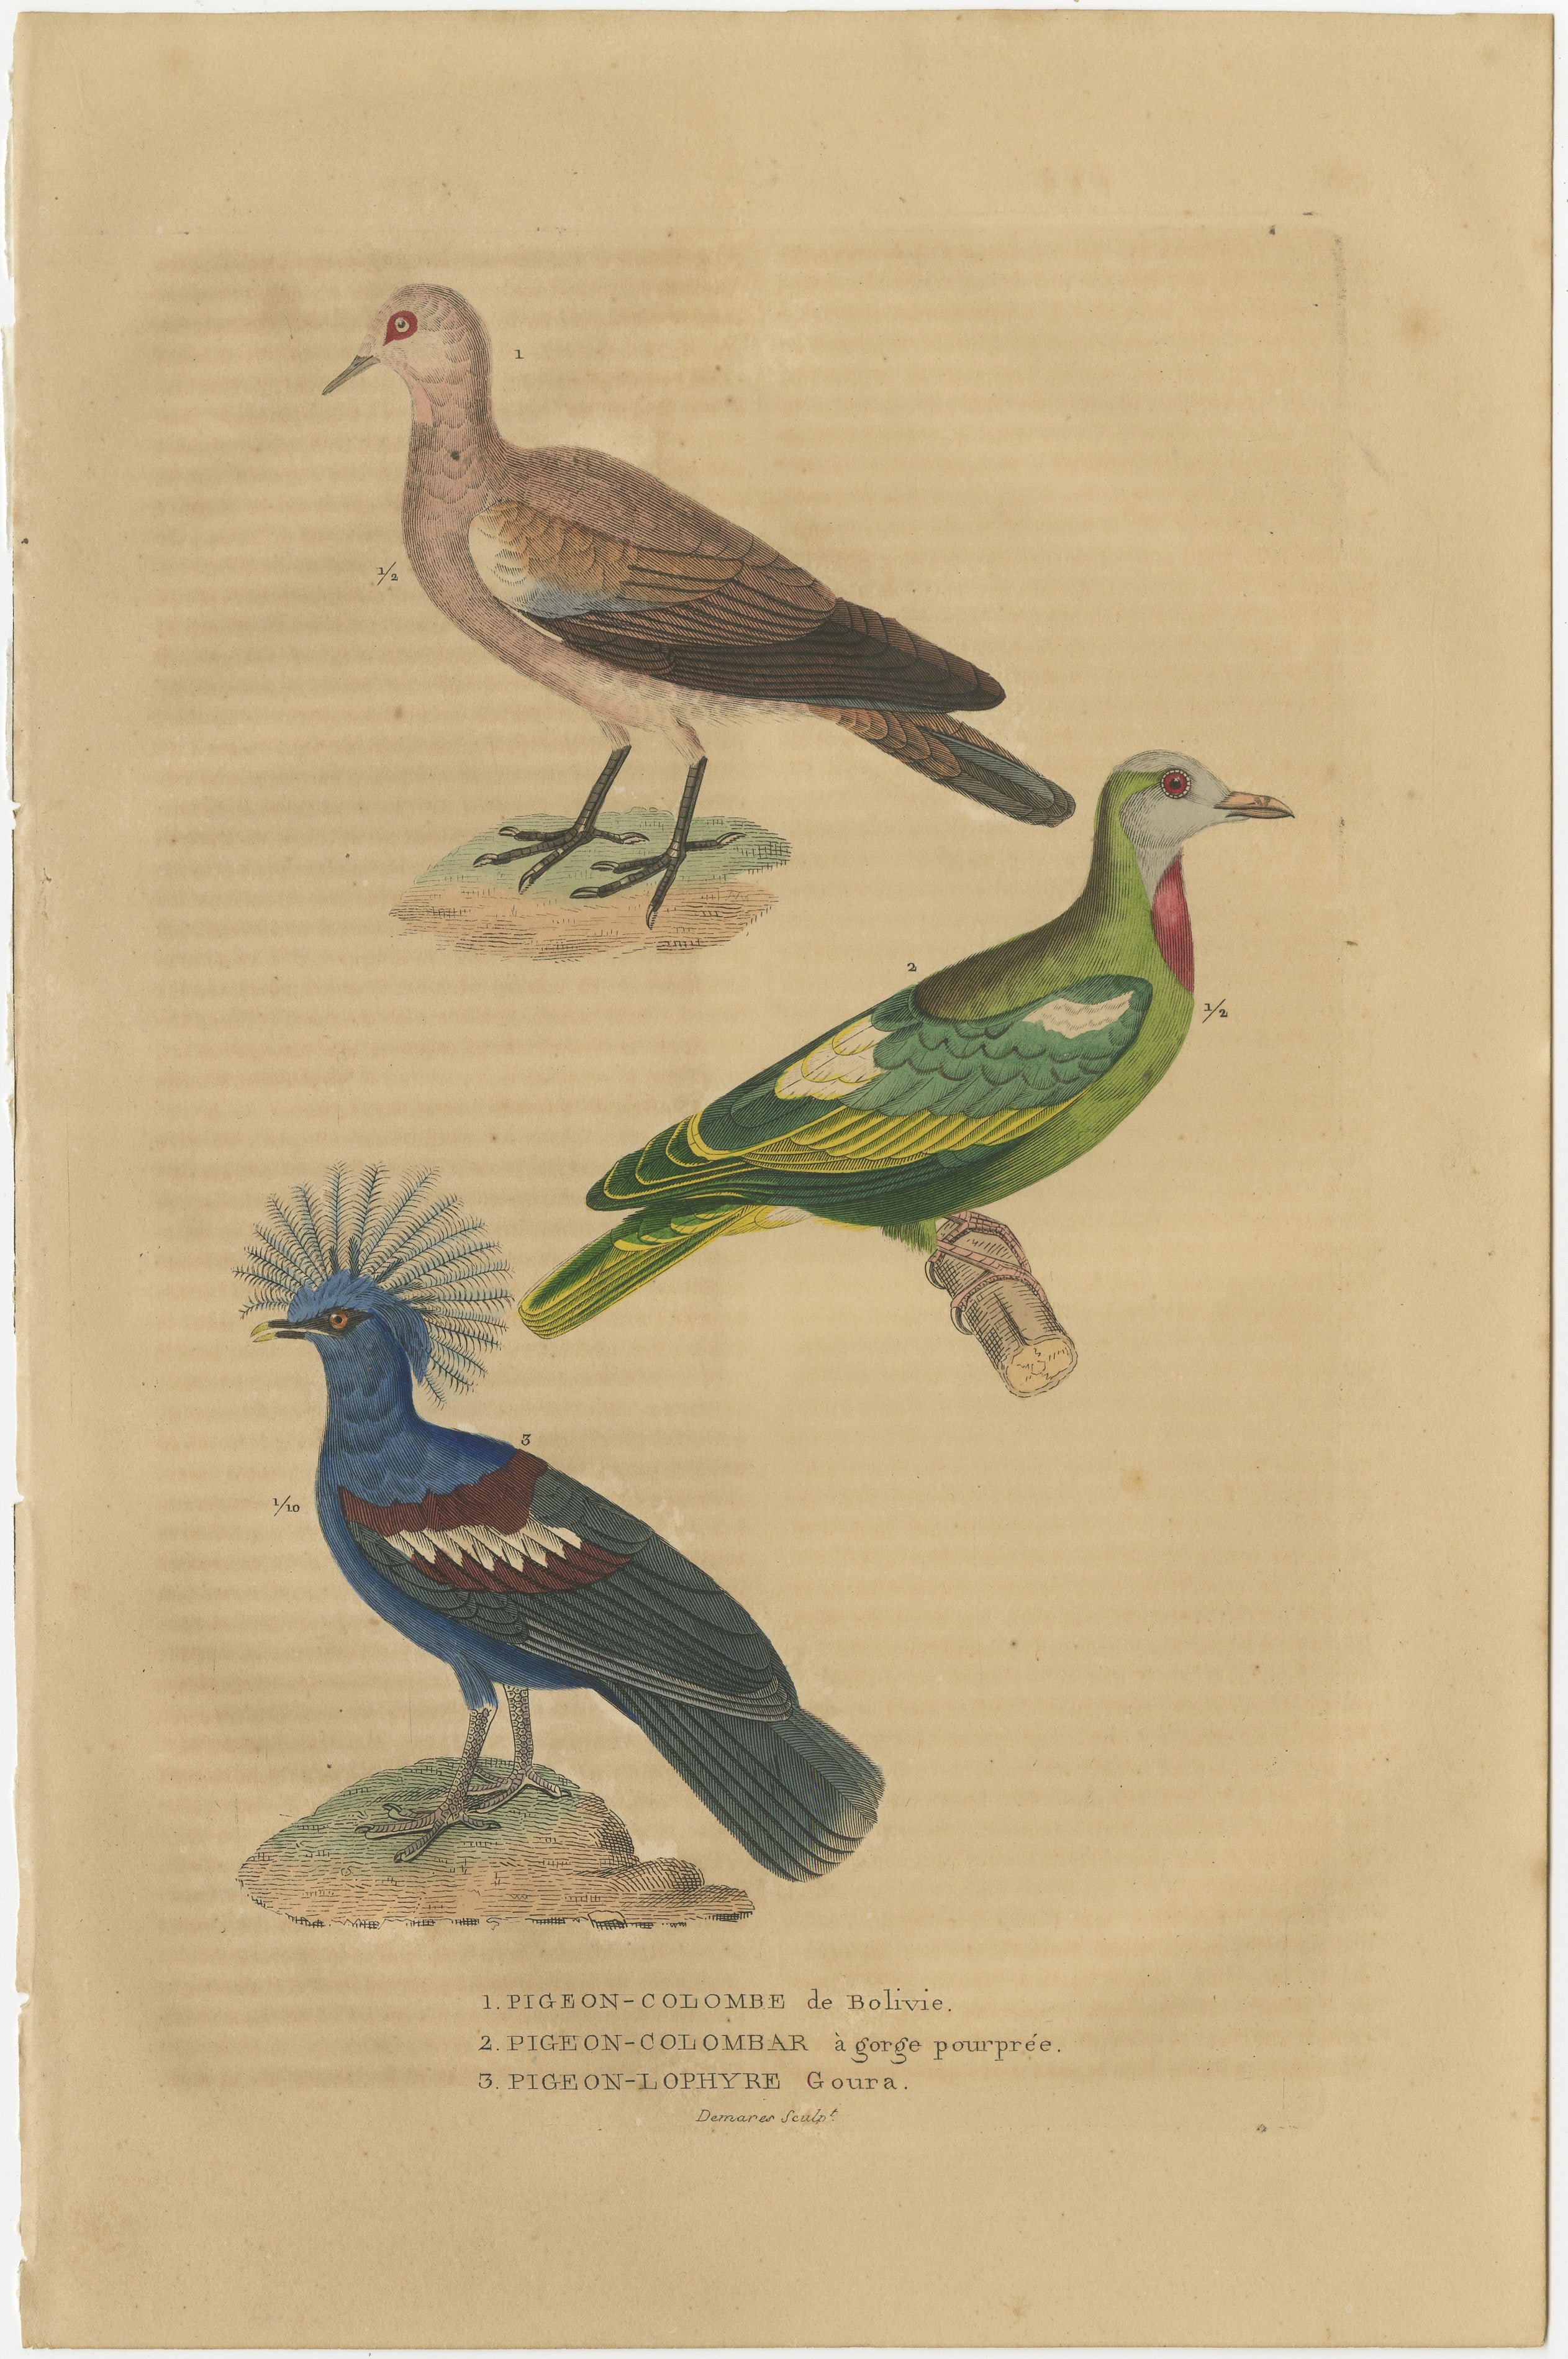 1. PIGEON-COLOMBE DE BOLIVIE, 2. PIGEON-COLOMBAR A GORGE POURPREE, 3. PIGEON-LOPHYRE GOURA.

– (1. Bare-faced Ground Dove, 2. African Green Pigeon, 3. Goura, crowned pigeon.)

The Ground Dove, a diminutive marvel, sports subtle earthy tones and